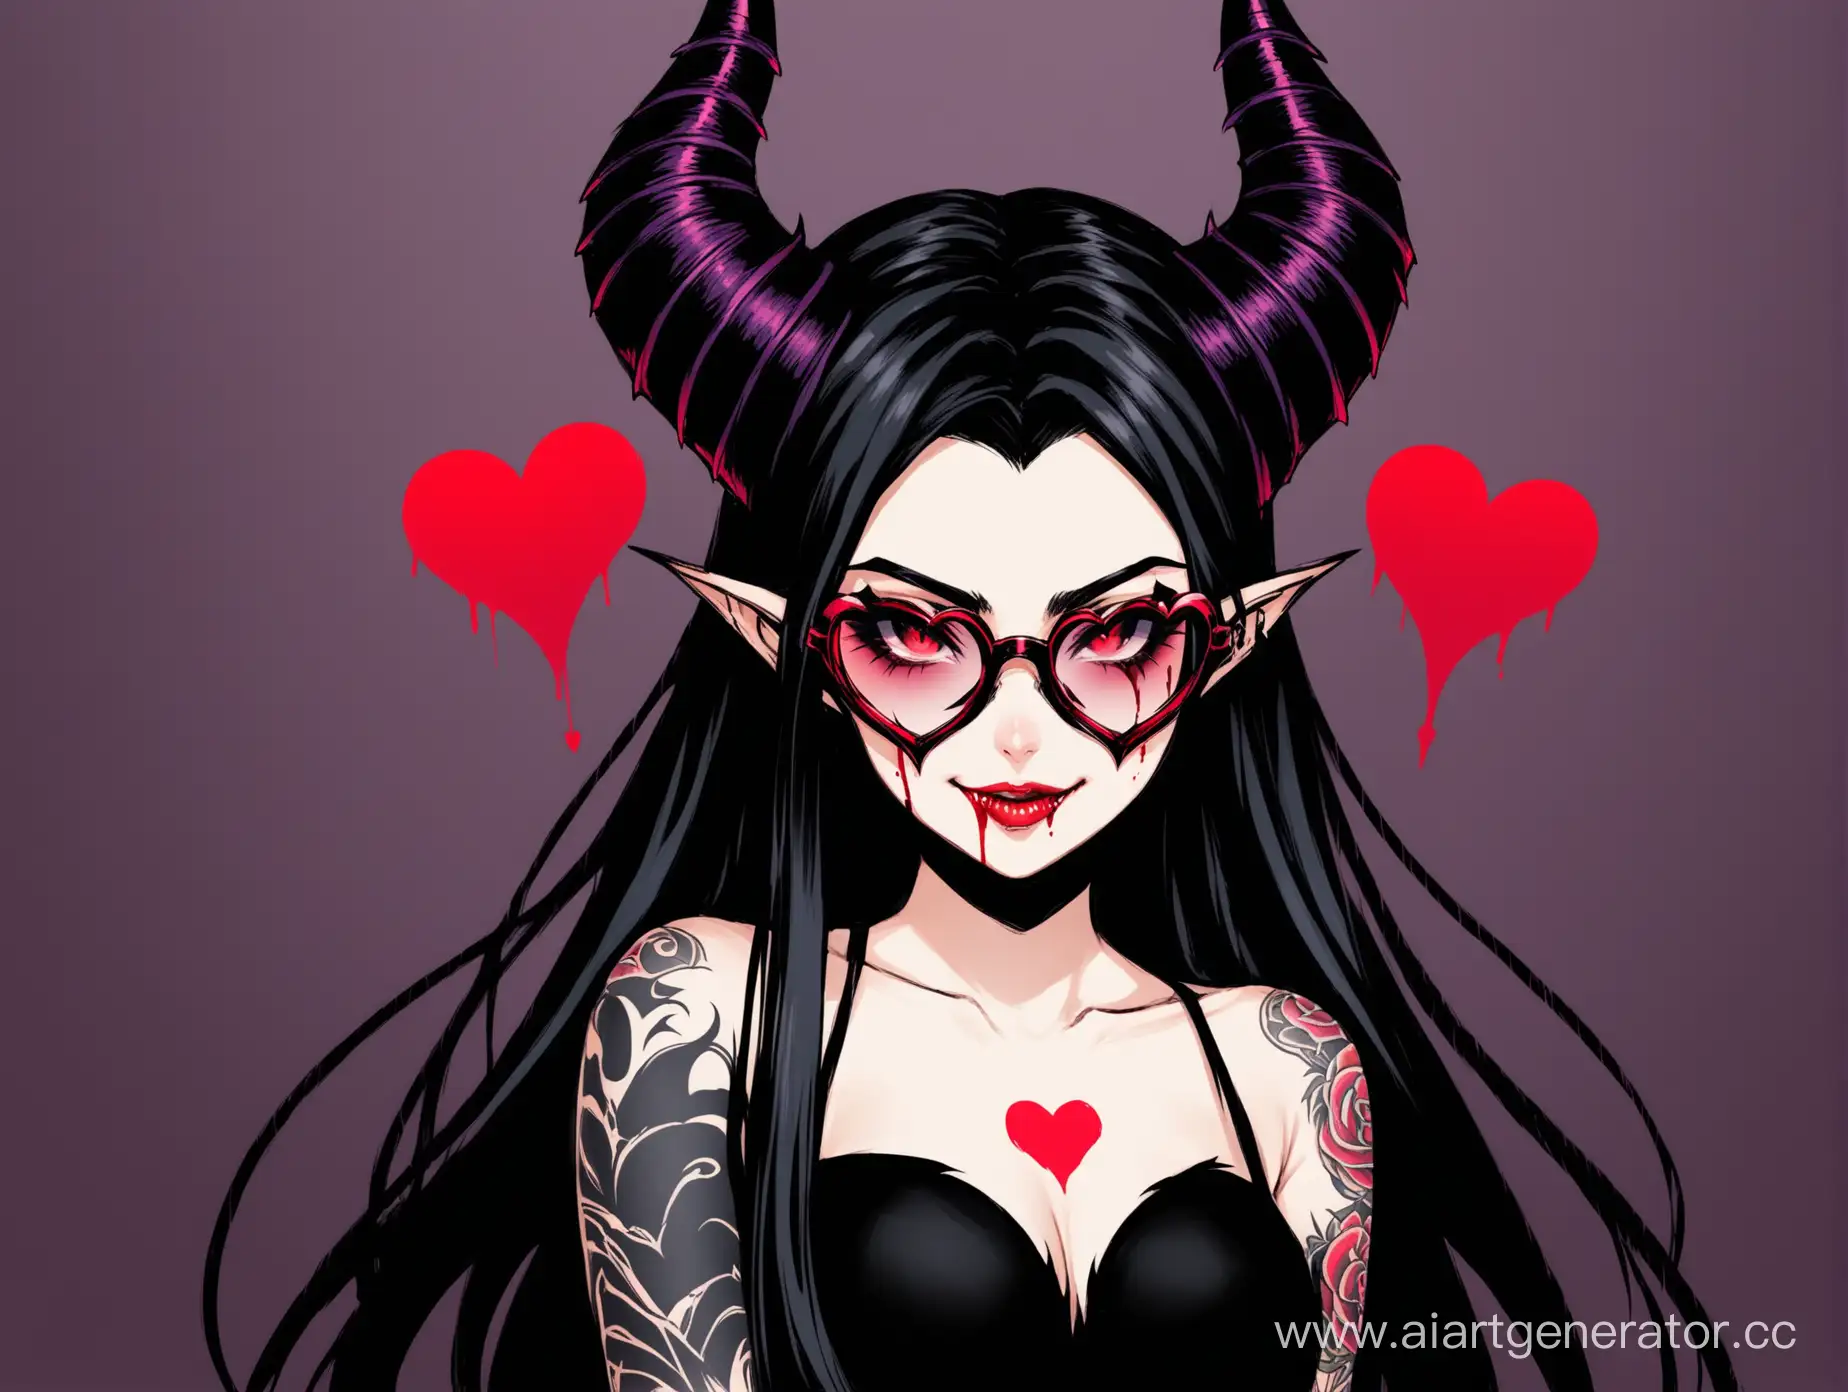 Enchanting-Maleficentinspired-Girl-with-Spiked-Mask-and-Tattoos